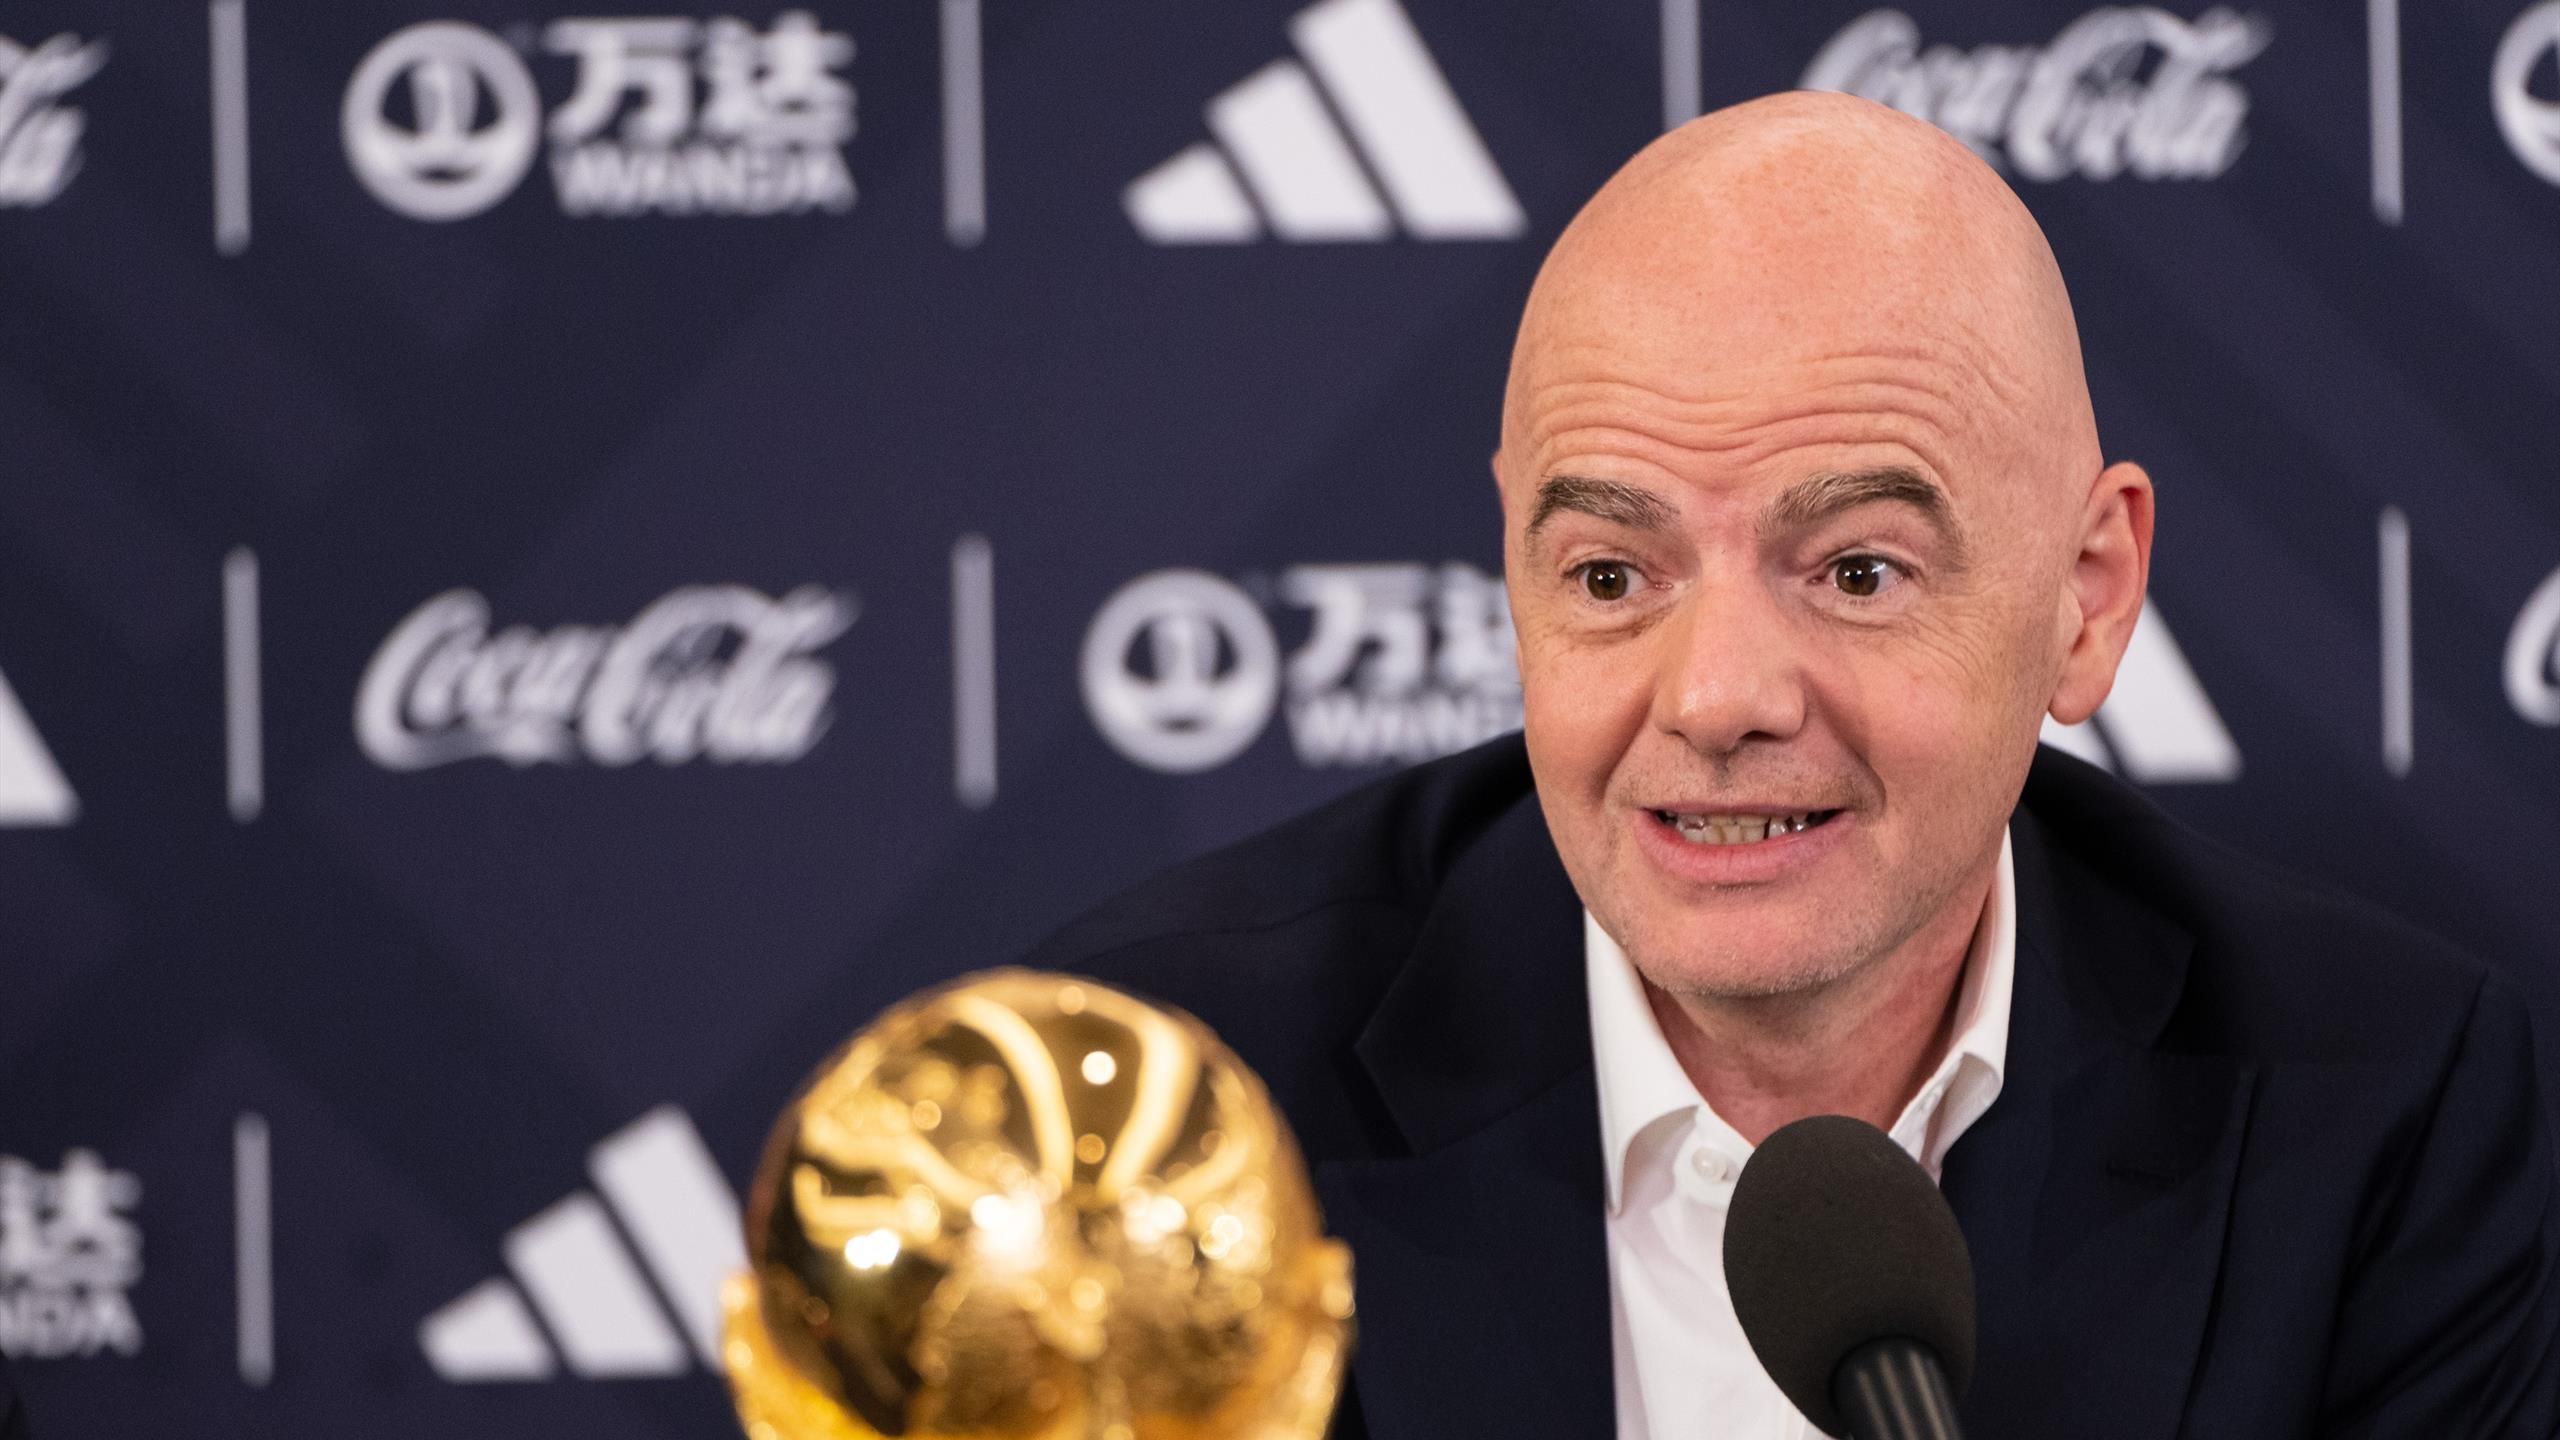 World Cup: FIFA President Gianni Infantino calls the death of migrant  workers a 'tragedy